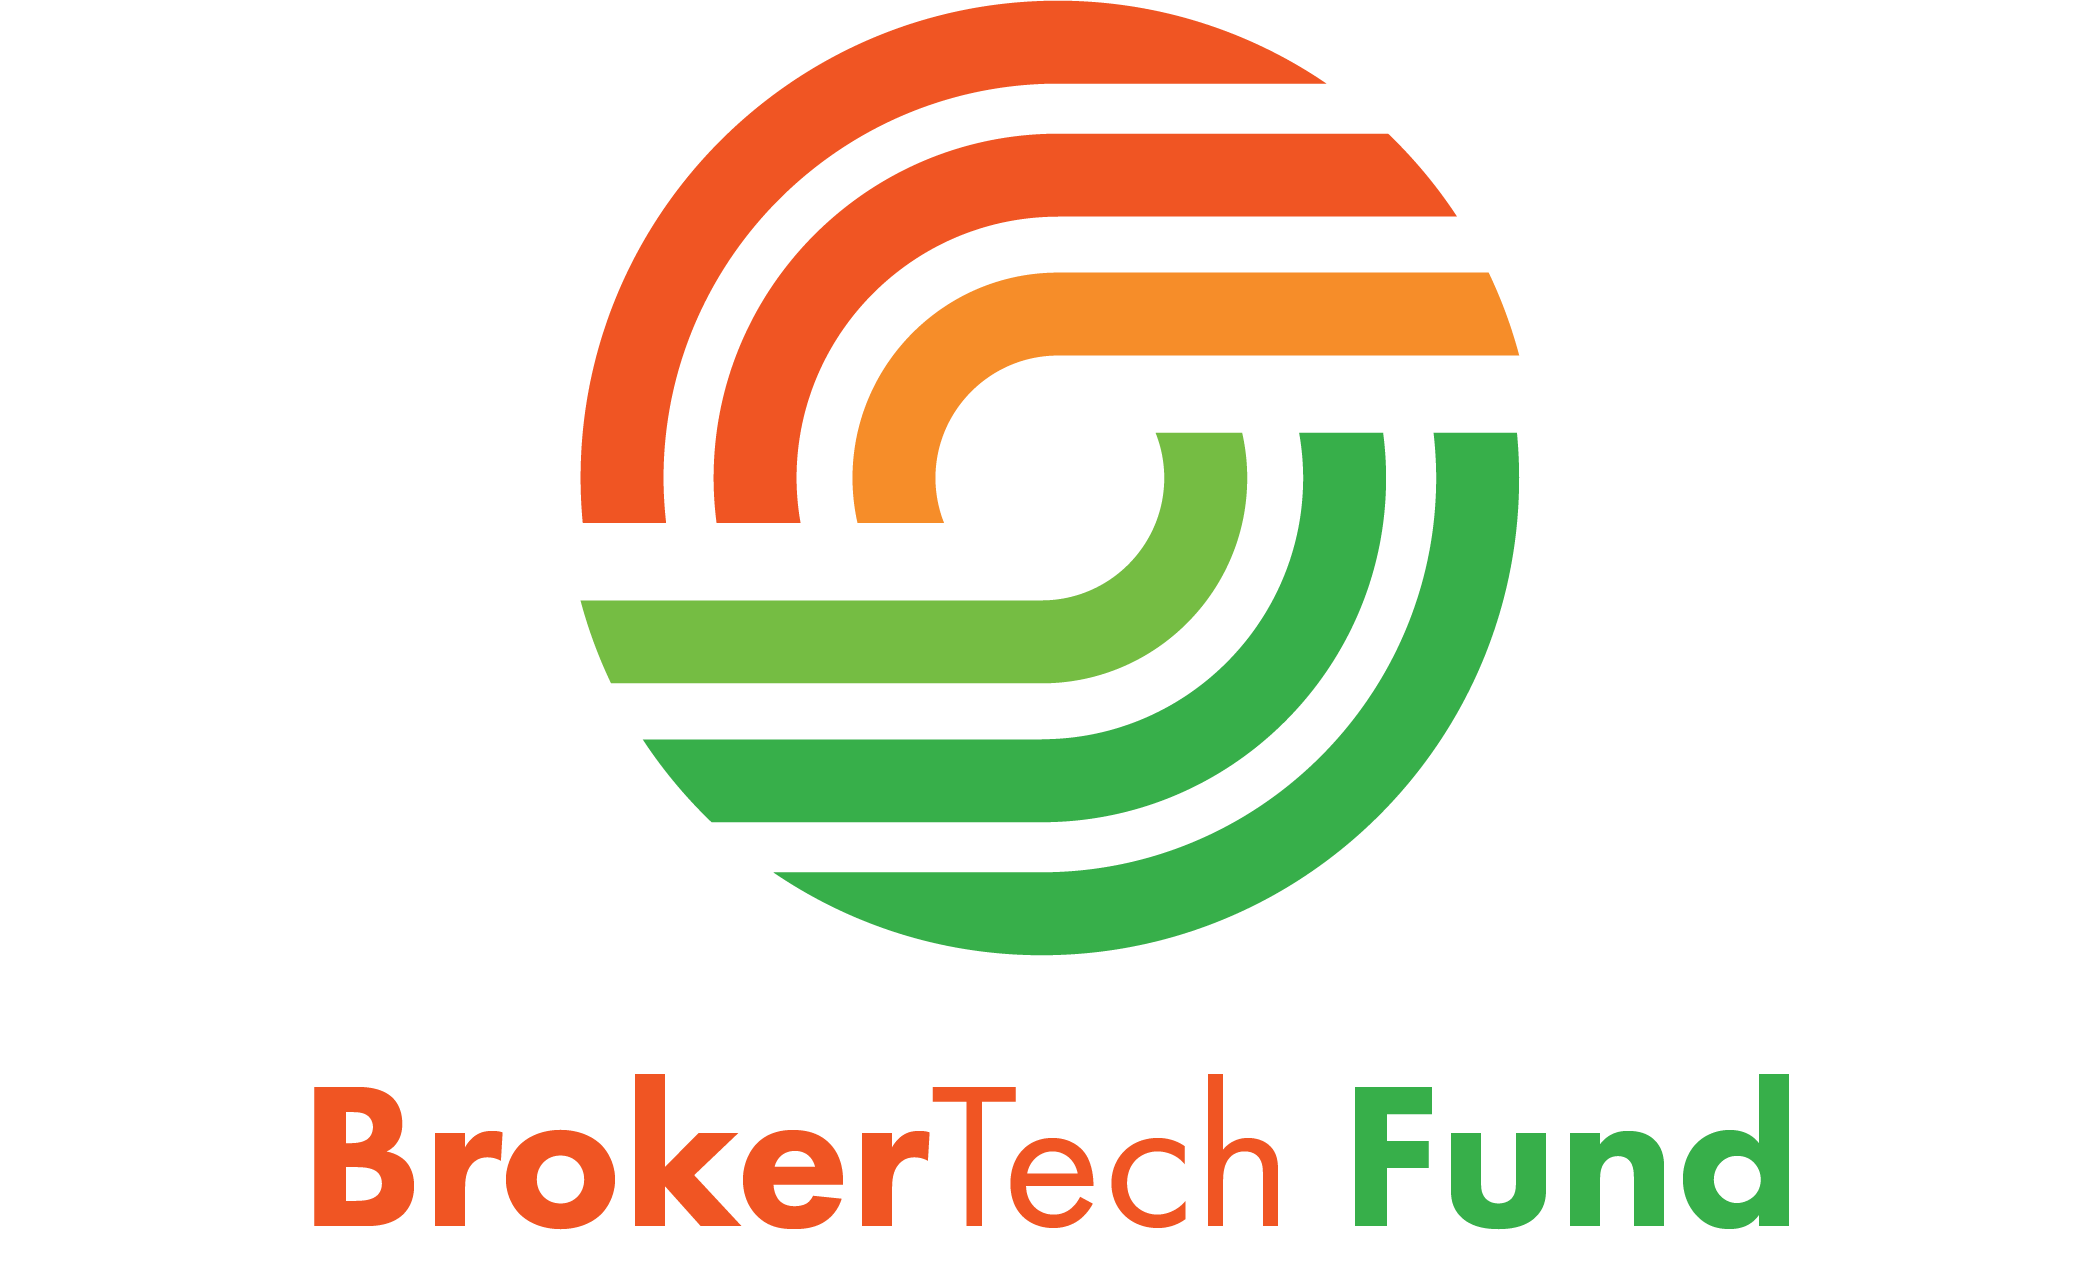 A red, orange, green lined circle with BrokerTech Fund in orange text.